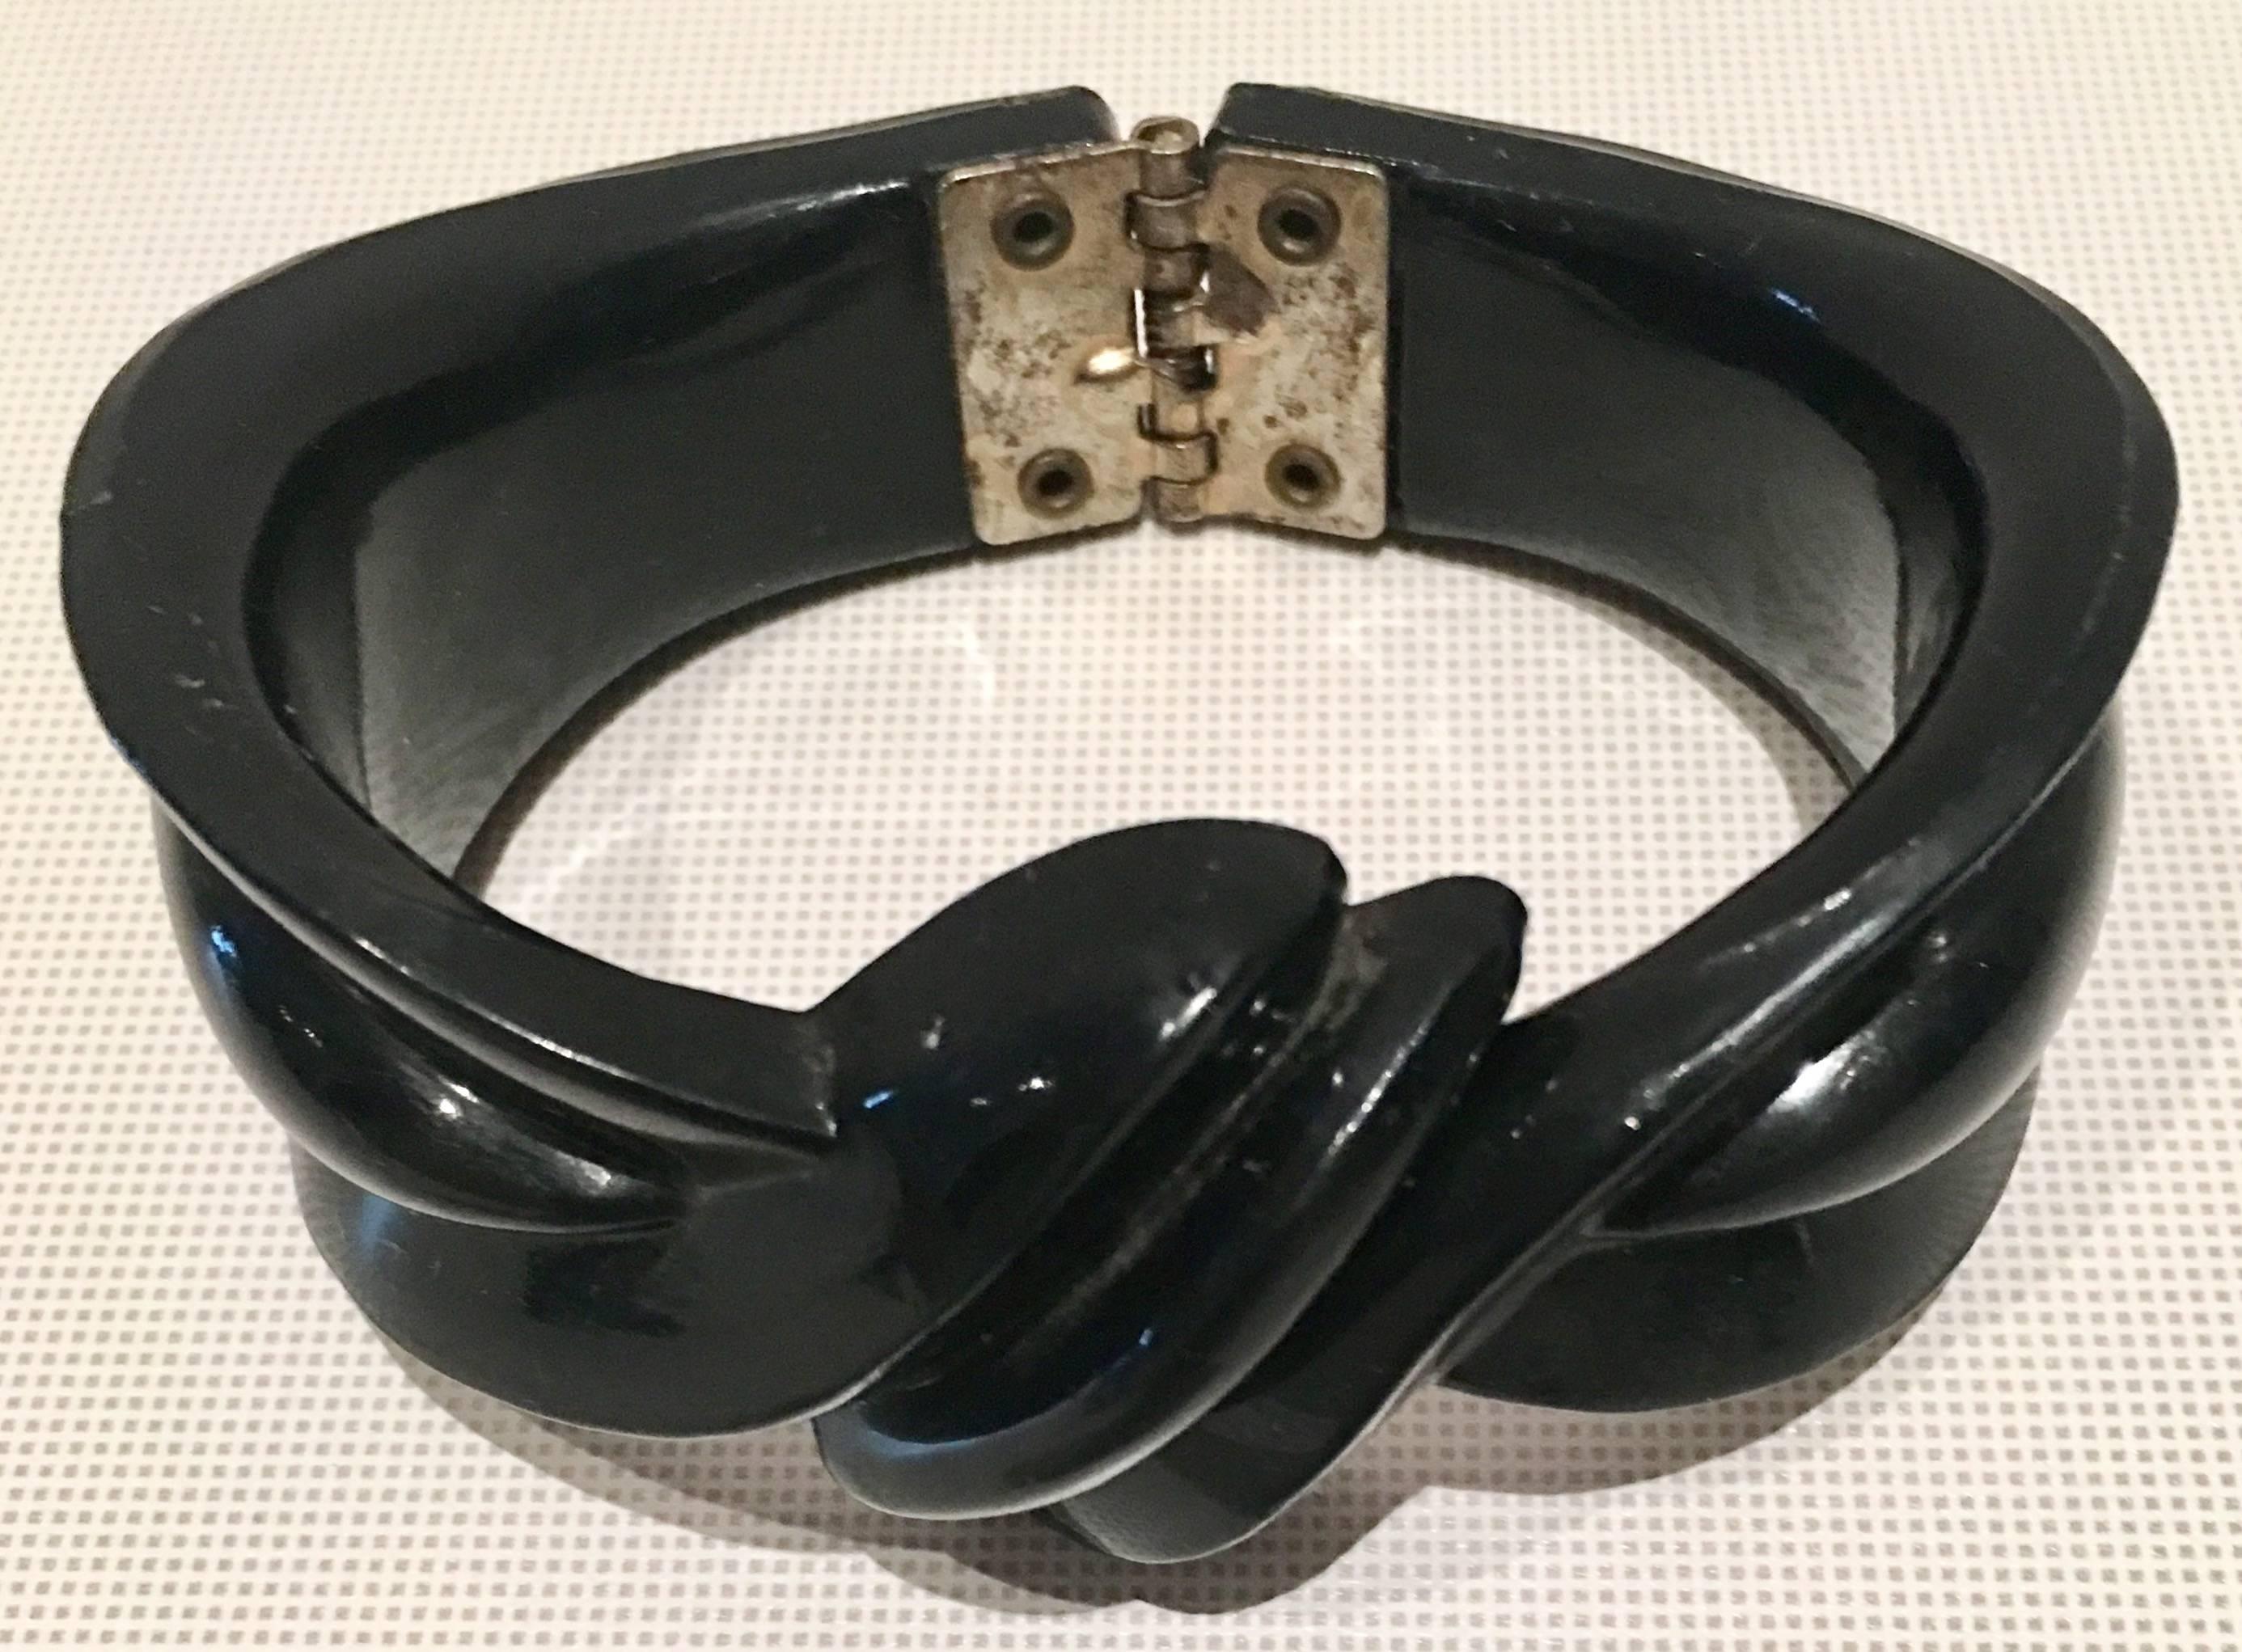 1940s deeply carved thermoplastic jet black clamper bracelet with silver tone metal. Internal diameter measures, 2.5" inches.
   